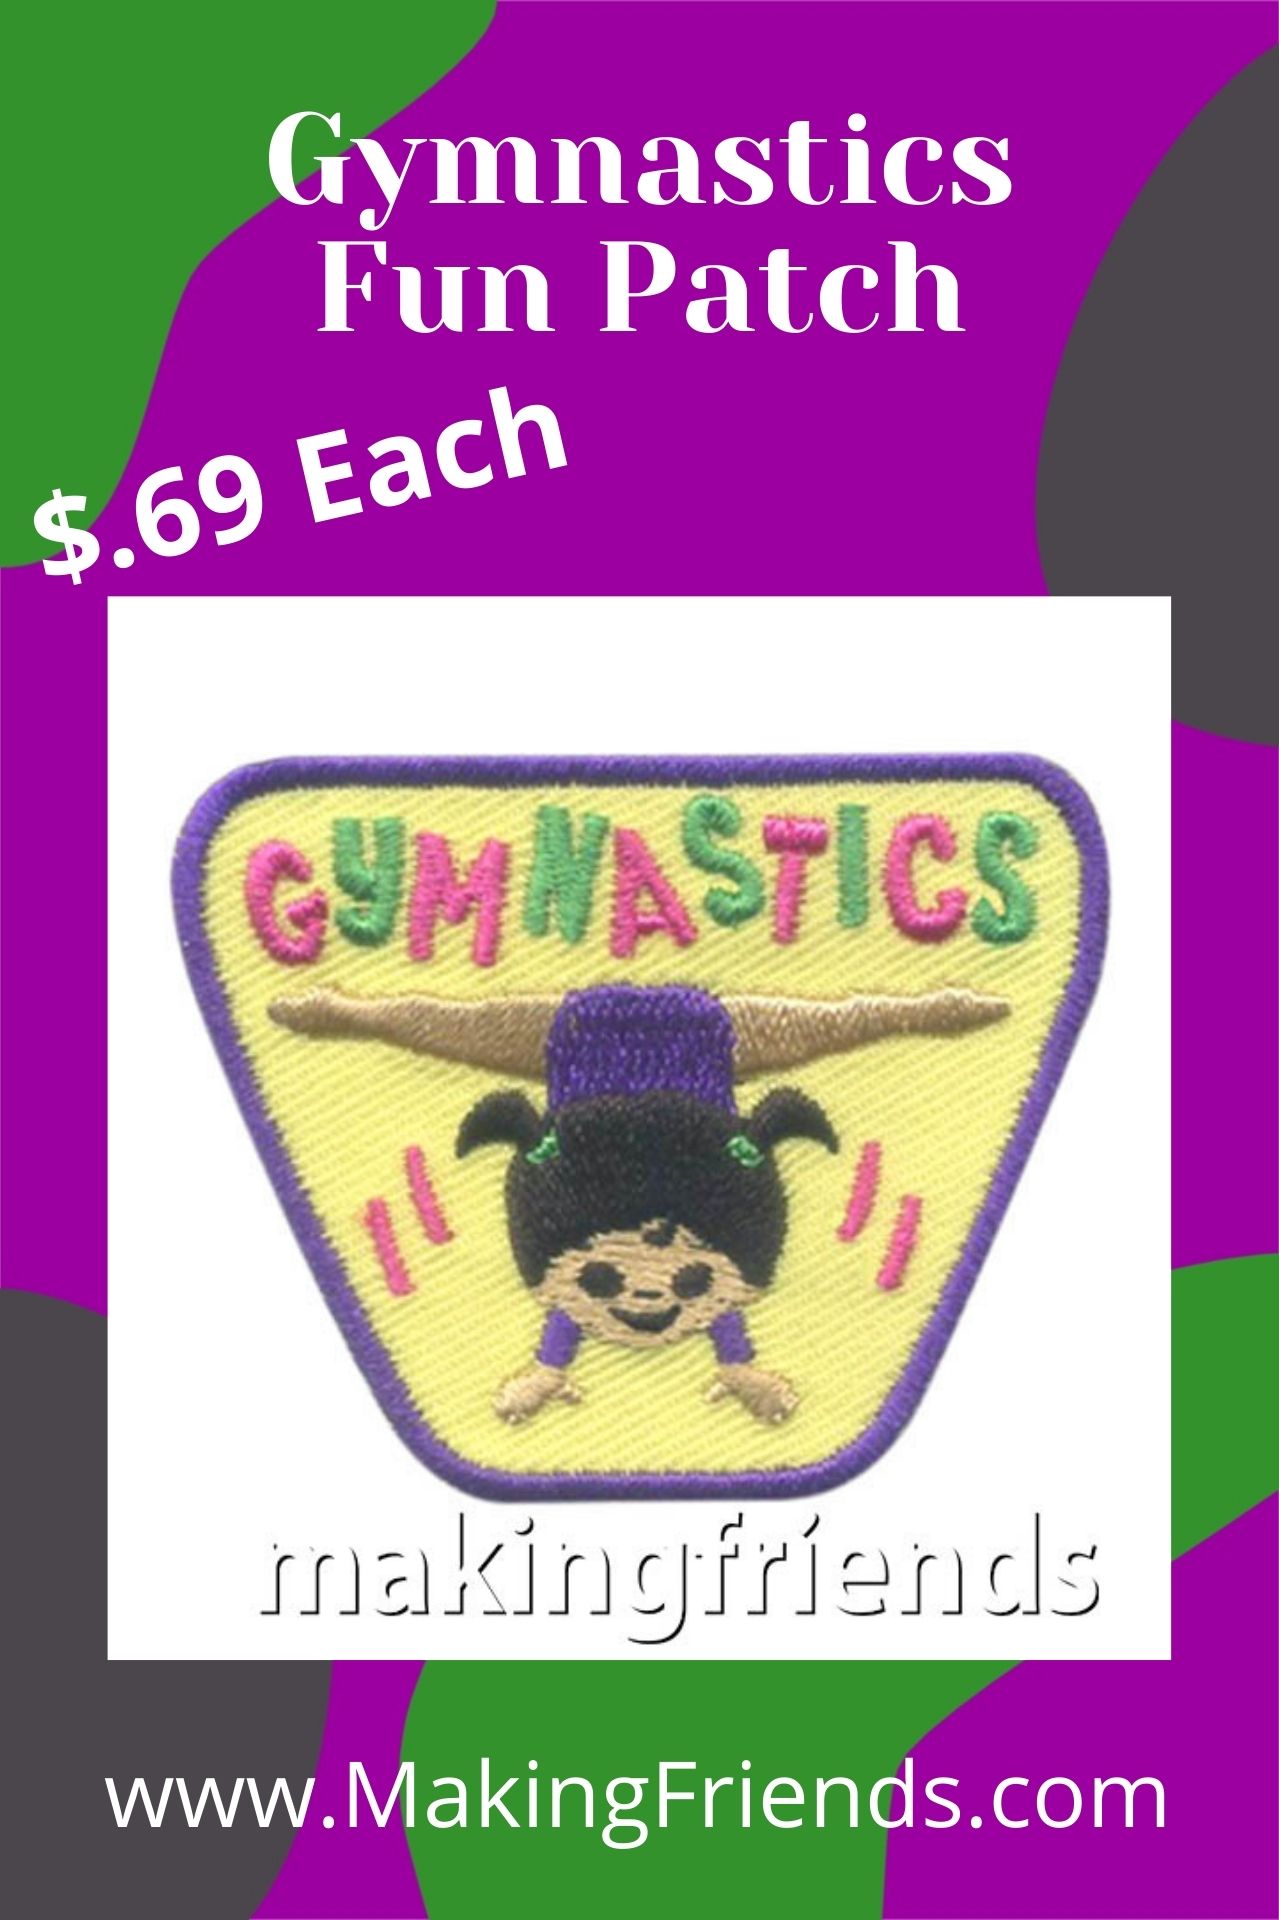 Gymnastics is a fun way to stay healthy! Add this patch to your program for girls to show off! $.69 each, free shipping available! #makingfriends #gymnastics #sports #excercise #behealthy #girlscouts #girlscoutsfunpatch #funpatch via @gsleader411